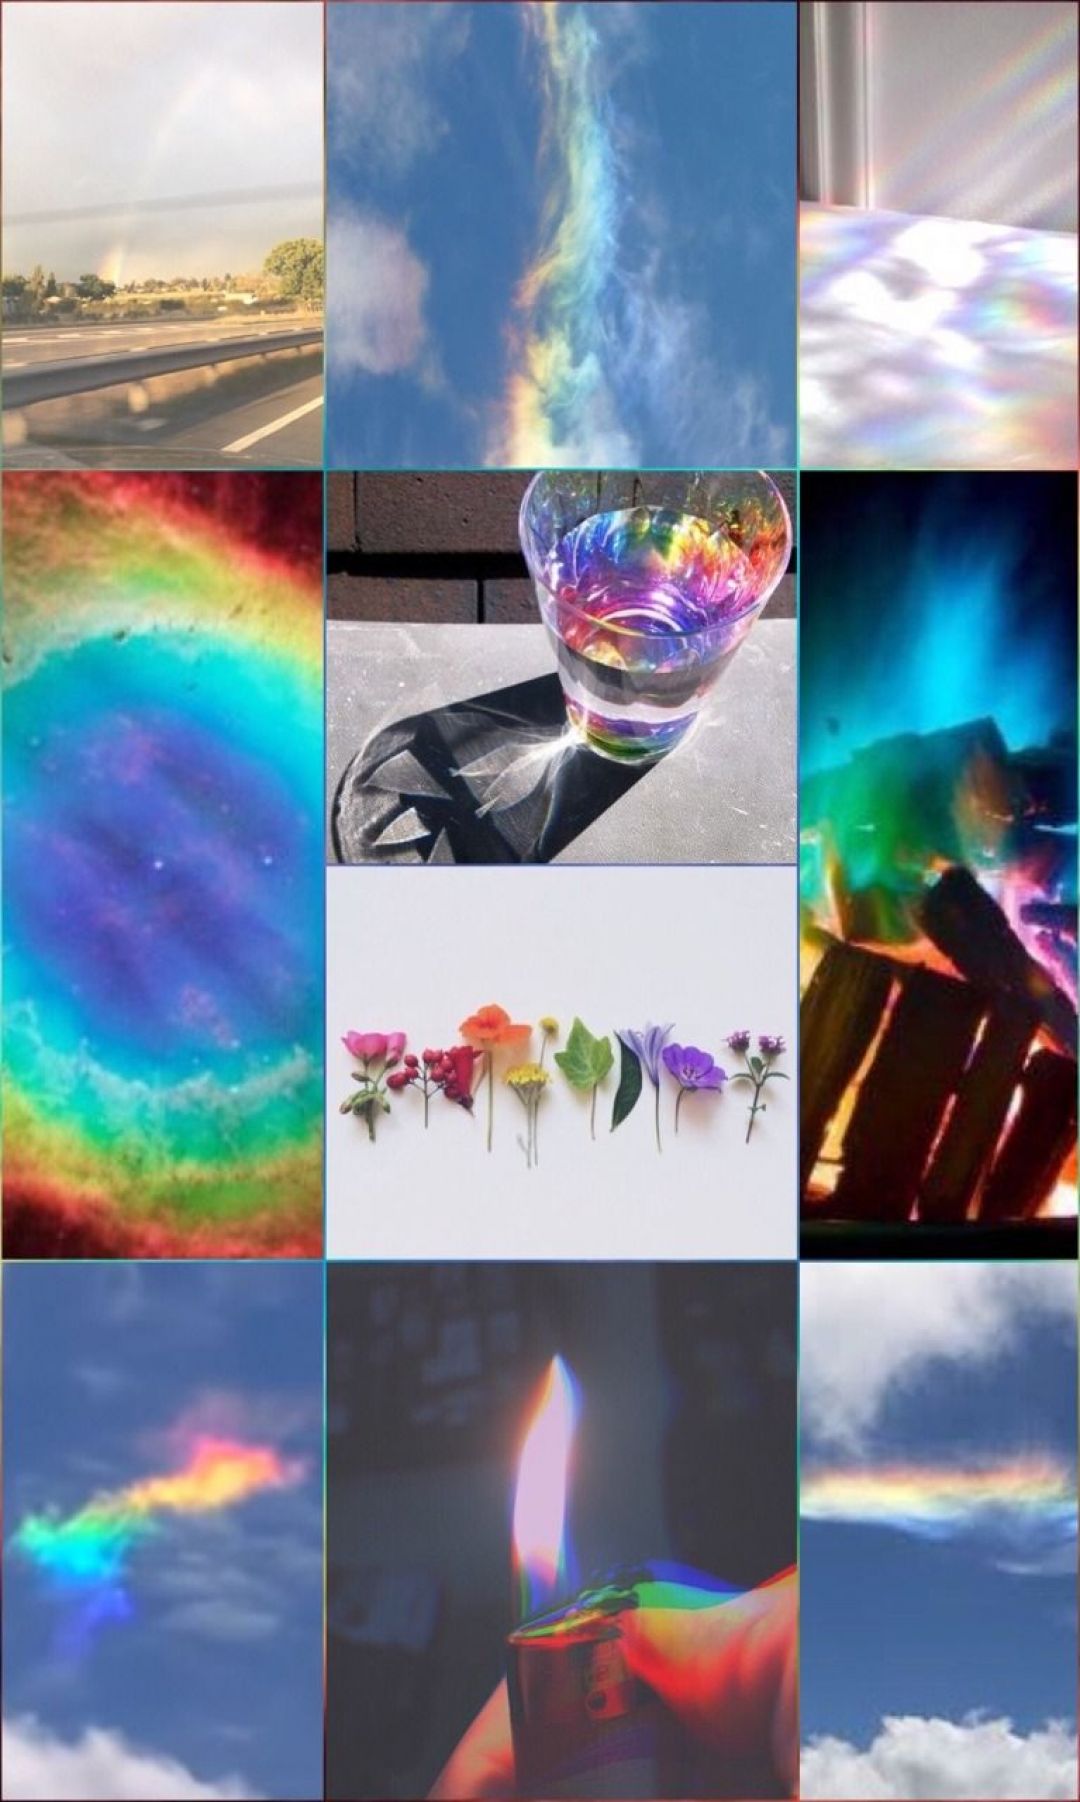 Aesthetic Lgbt Wallpapers